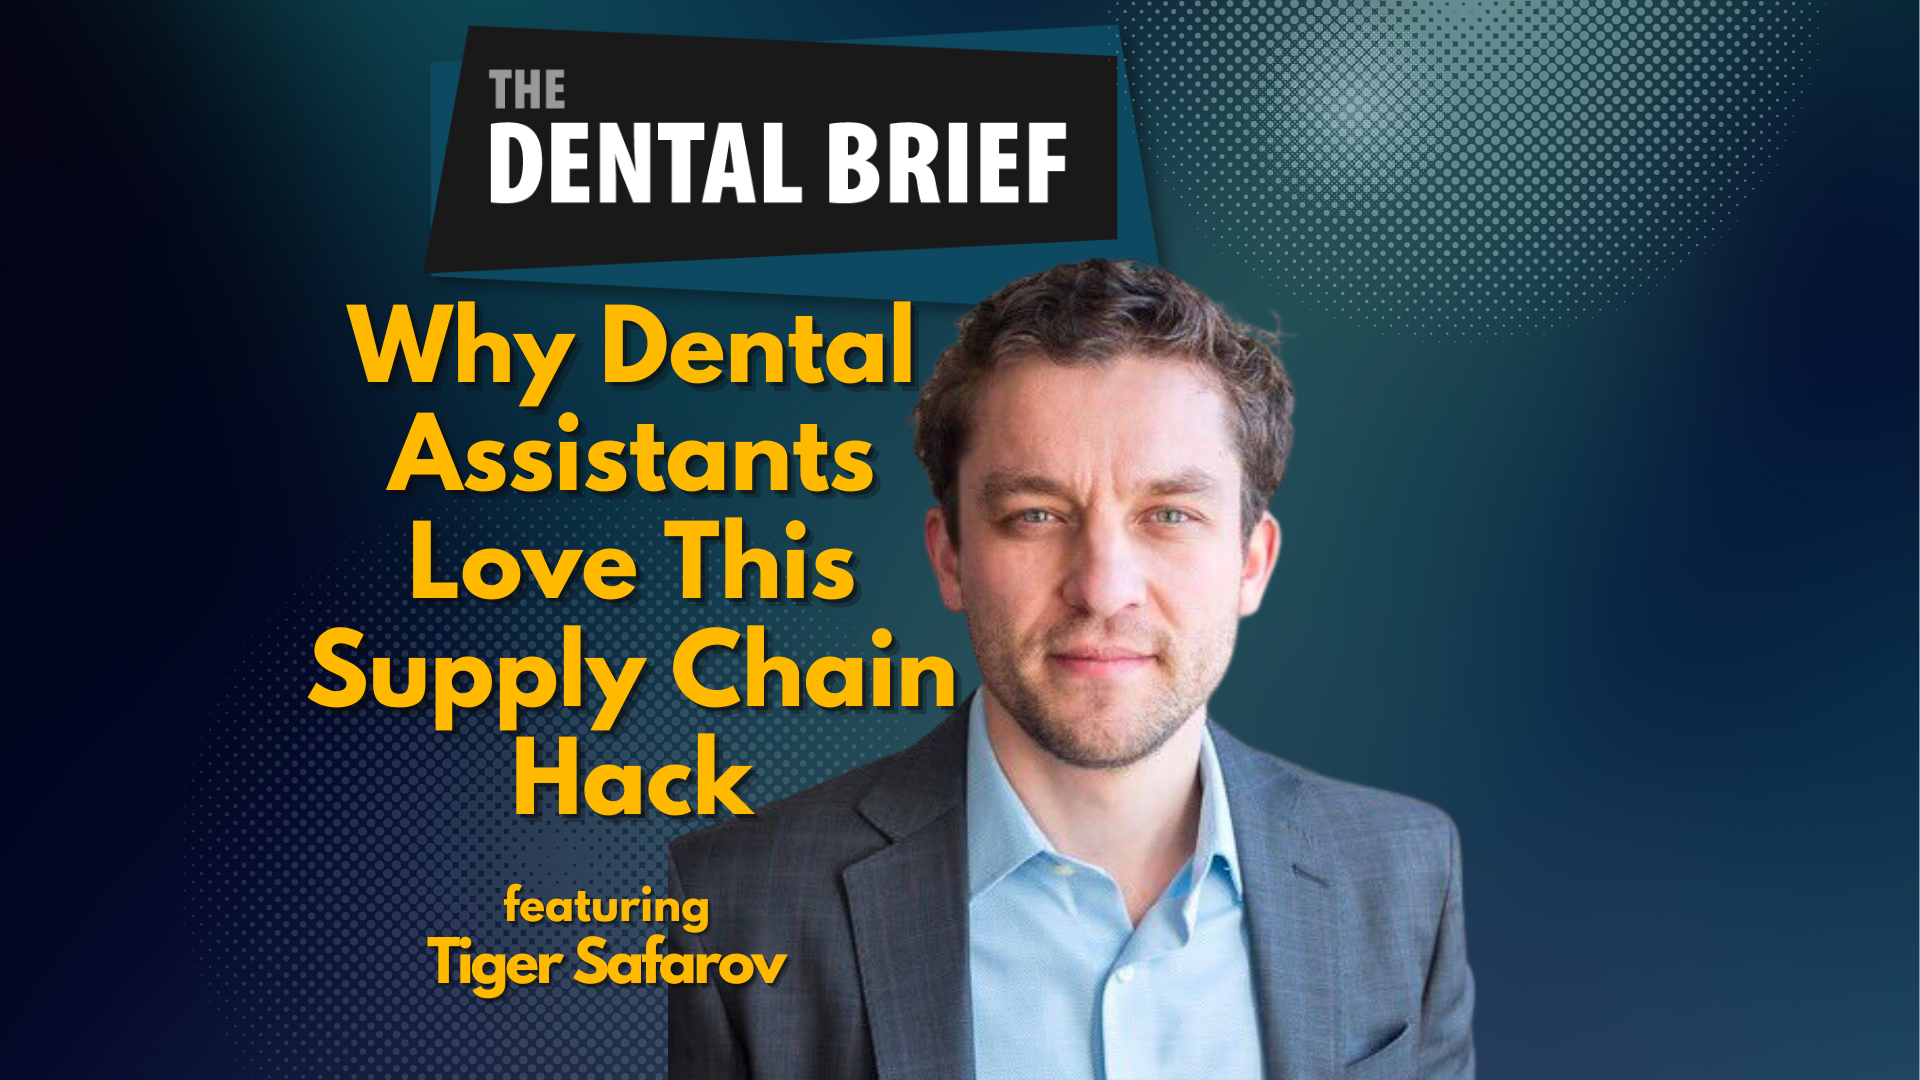 thumbnail for the dental brief podcast episode featuring tiger safarov of ZenSupplies